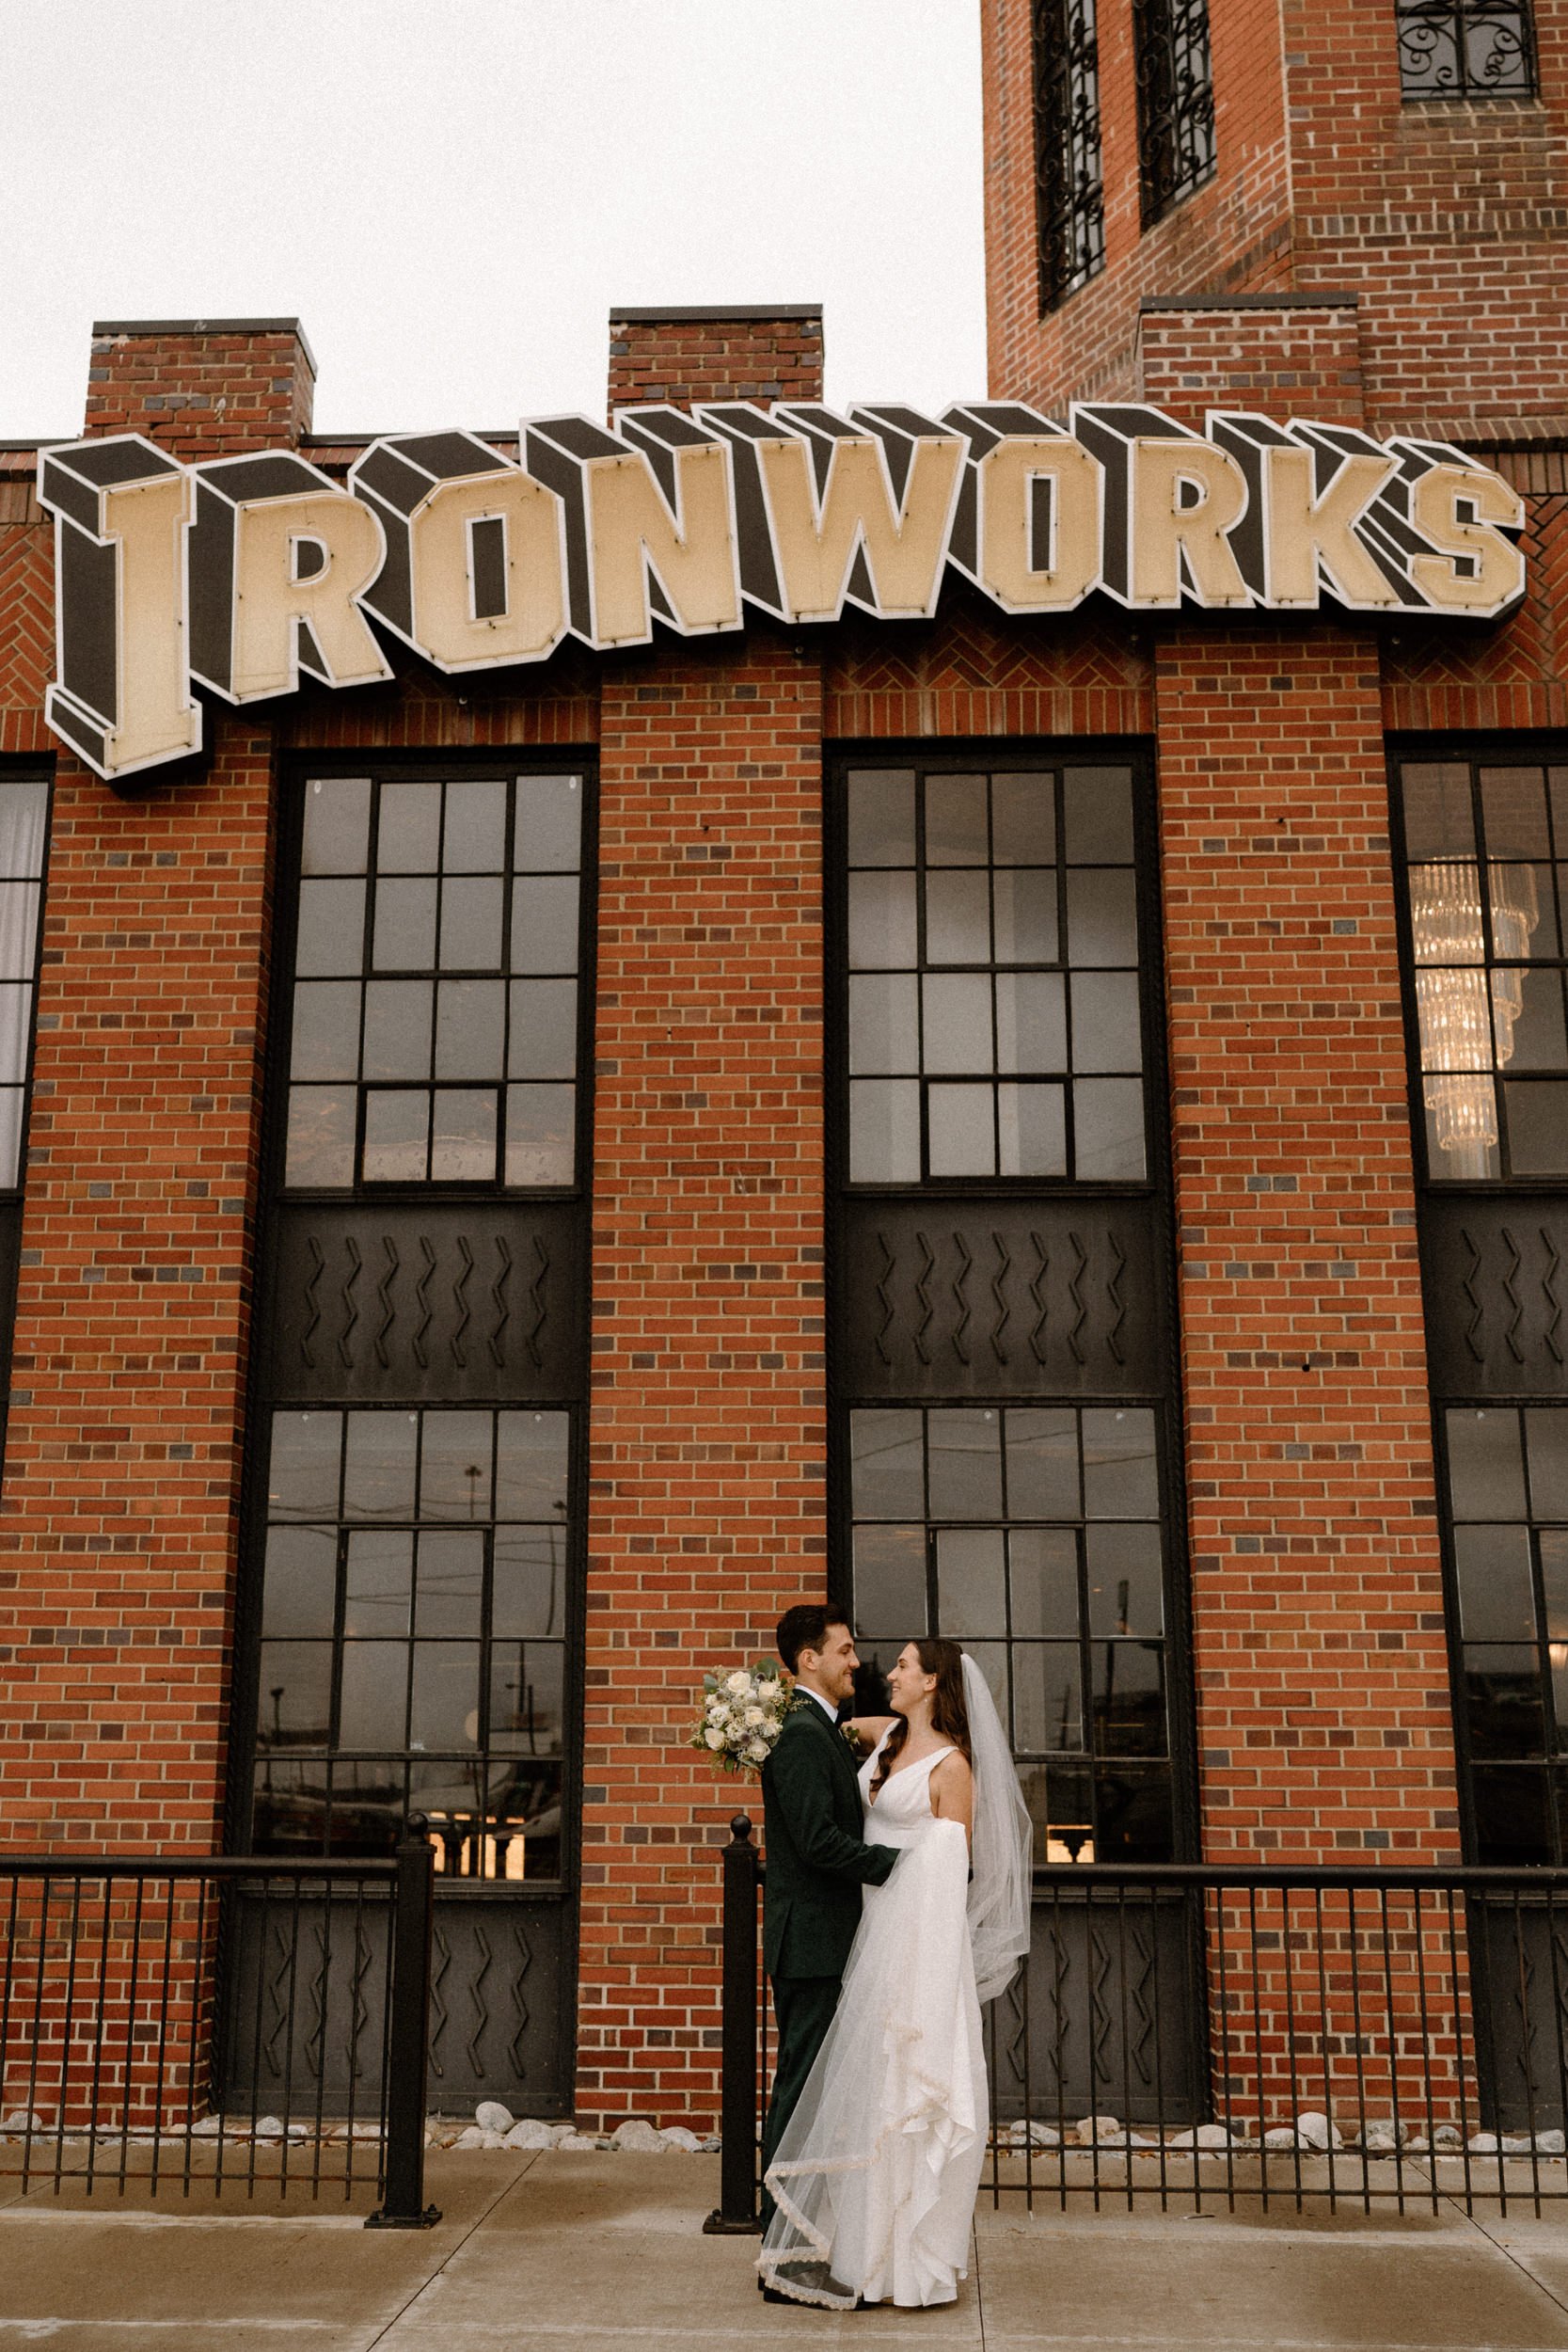 The bride and groom pose against a brick building at Ironworks in Denver, CO